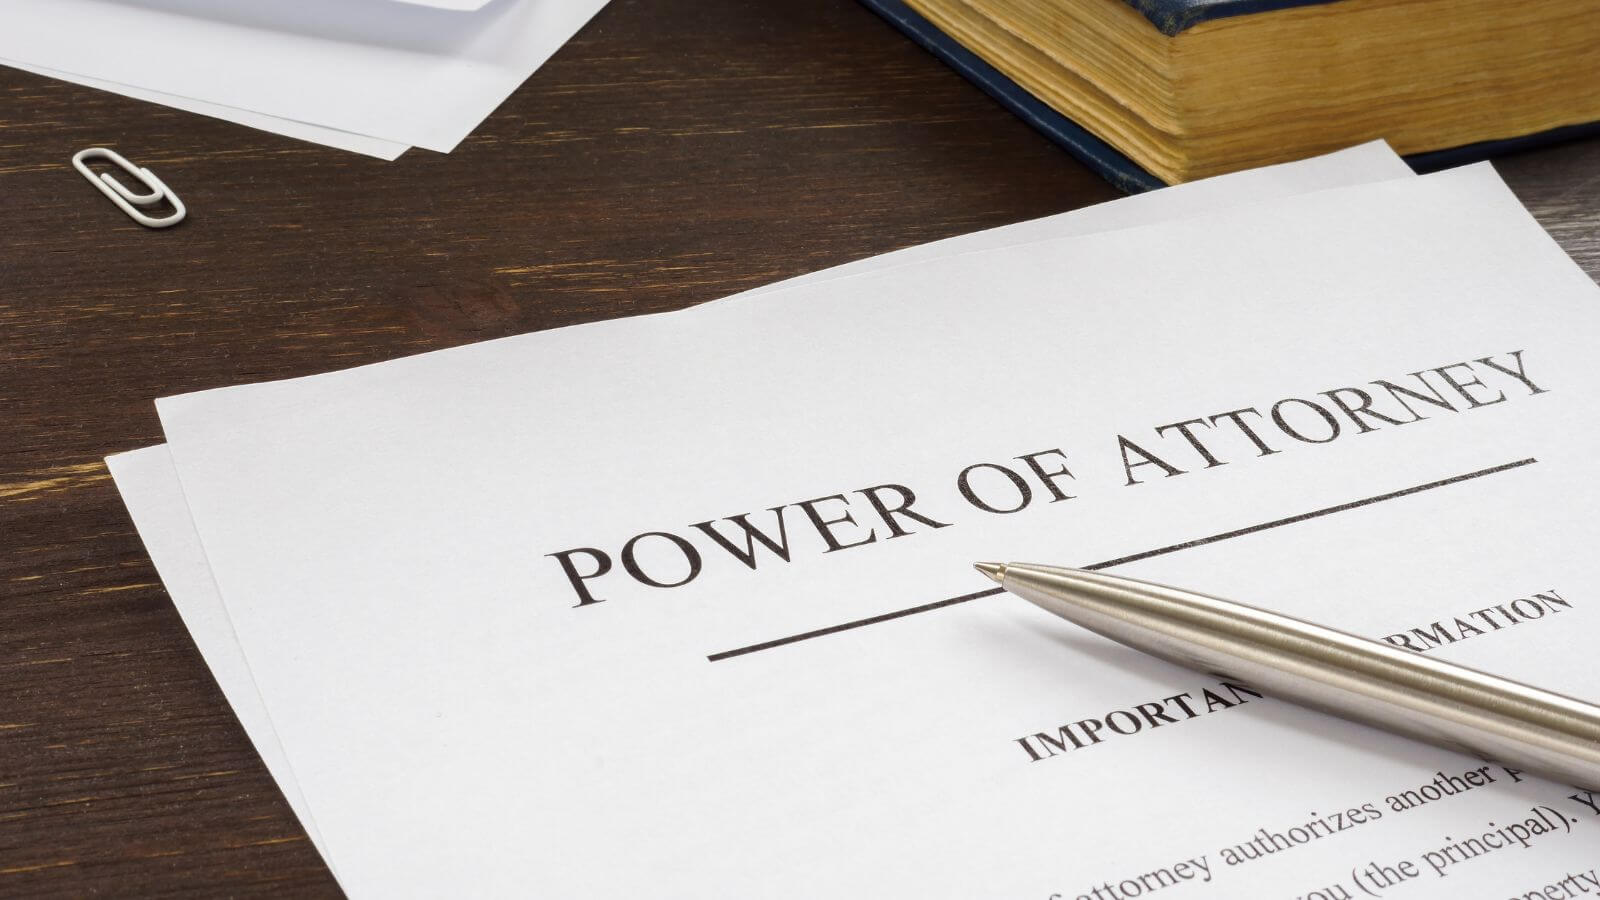 What is the Difference between Limited and General Power of Attorney?